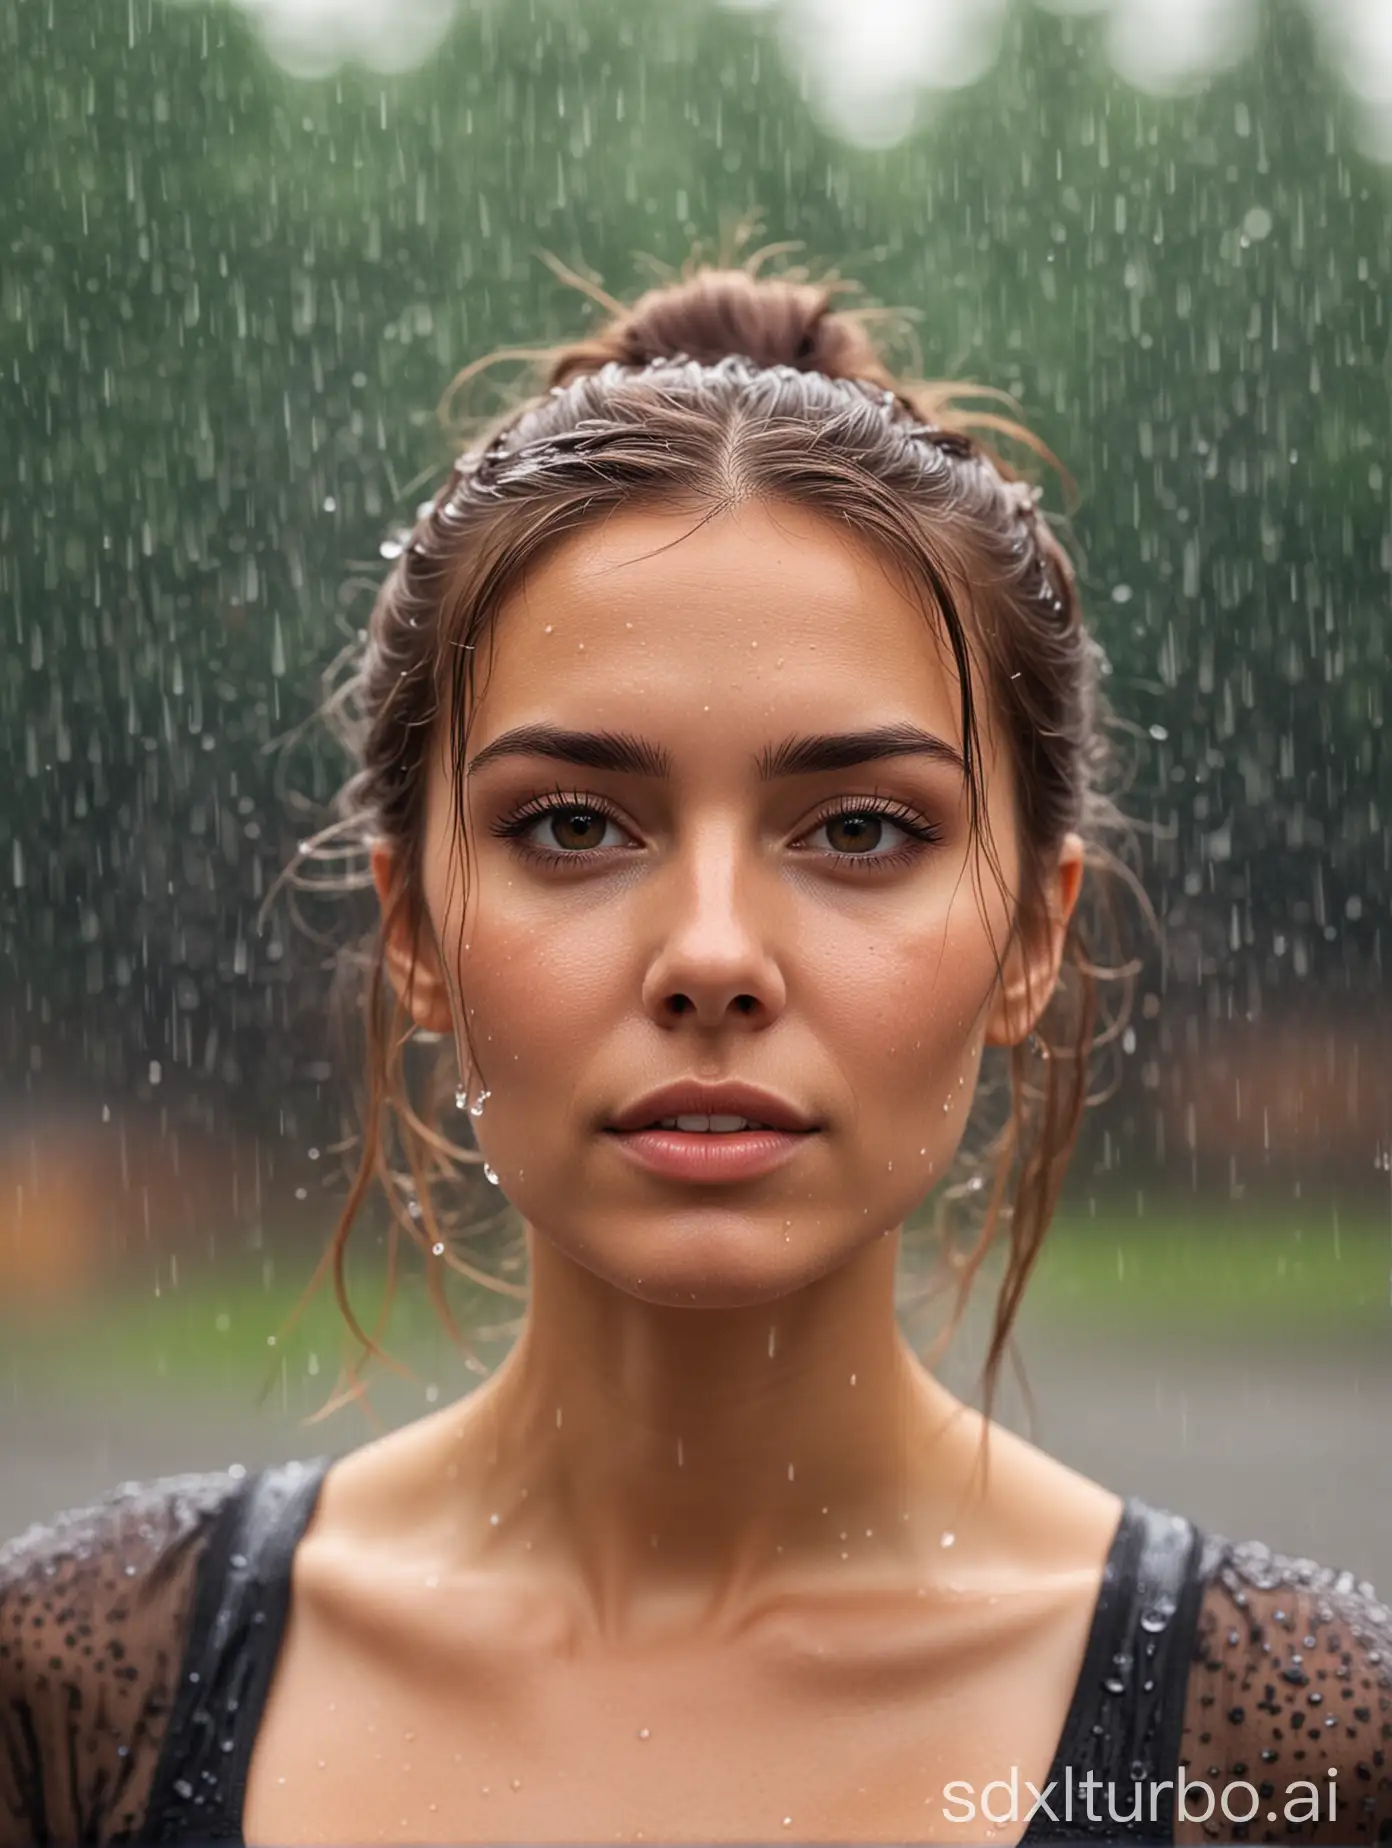 Woman-with-Medium-Brown-Hair-in-Rainy-Weather-CloseUp-Portrait